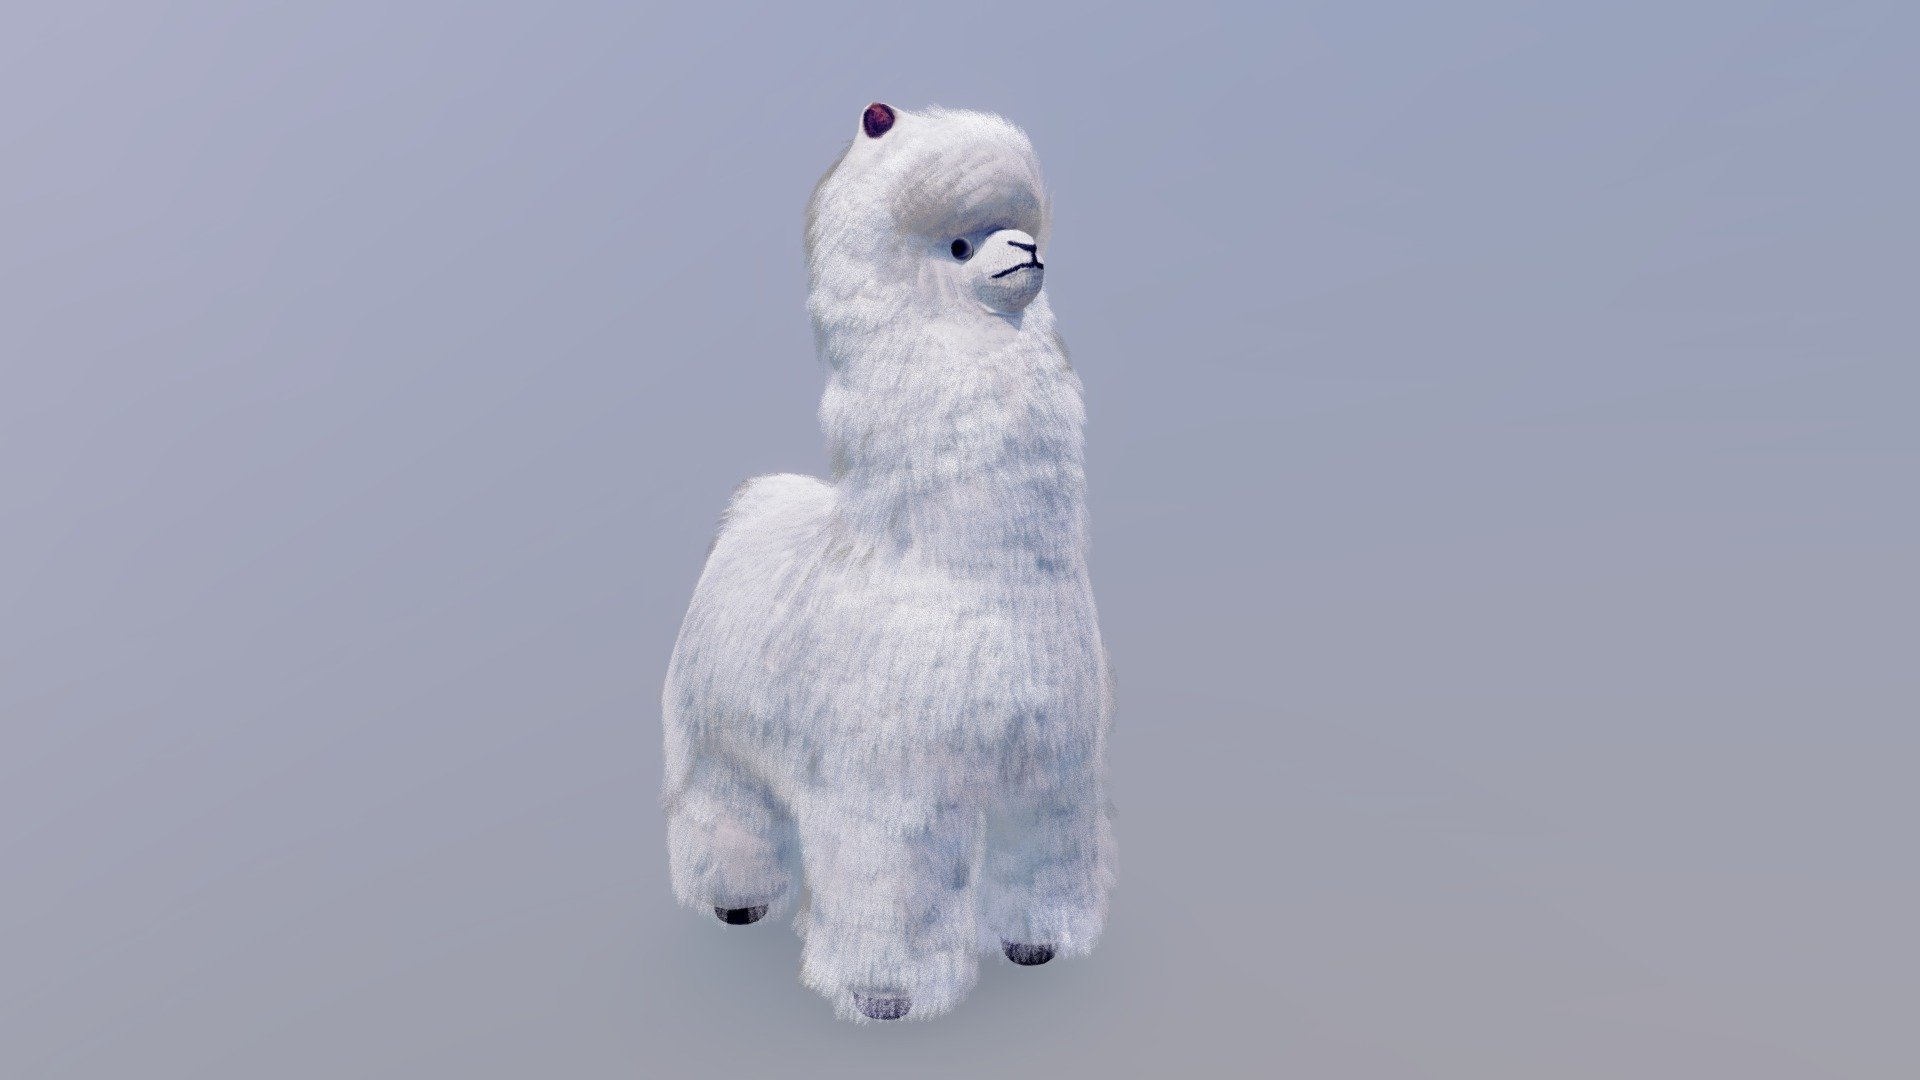 This is a stuffed Animal LLama I made with Zbrush, Maya, and Photoshop 3d model